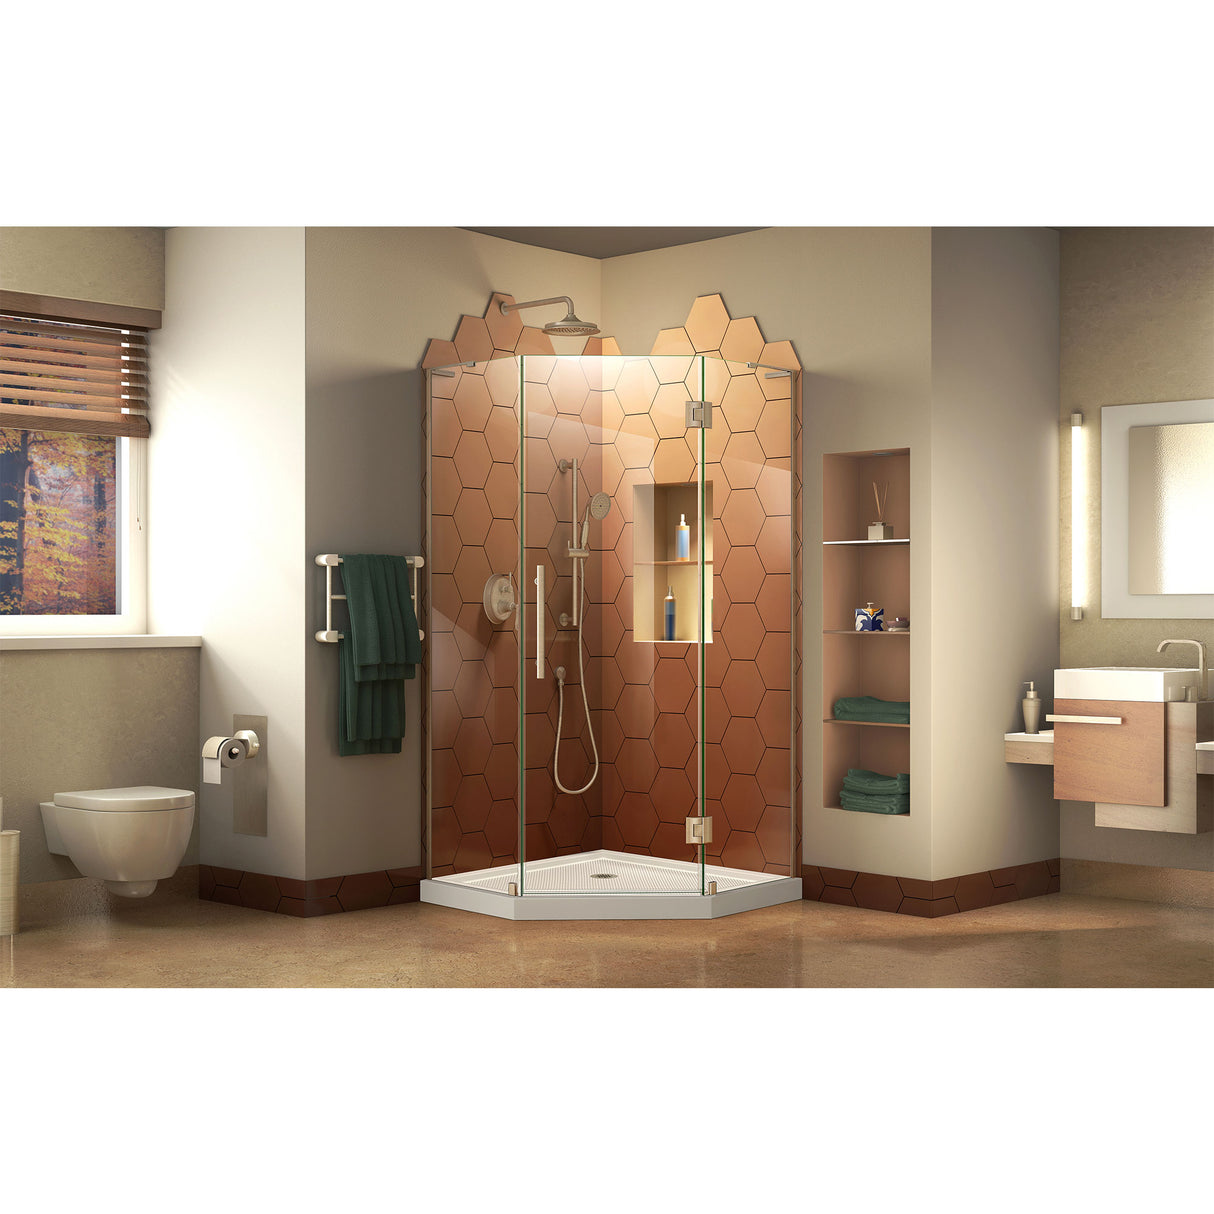 DreamLine Prism Plus 42 in. x 74 3/4 in. Frameless Neo-Angle Shower Enclosure in Brushed Nickel with White Base